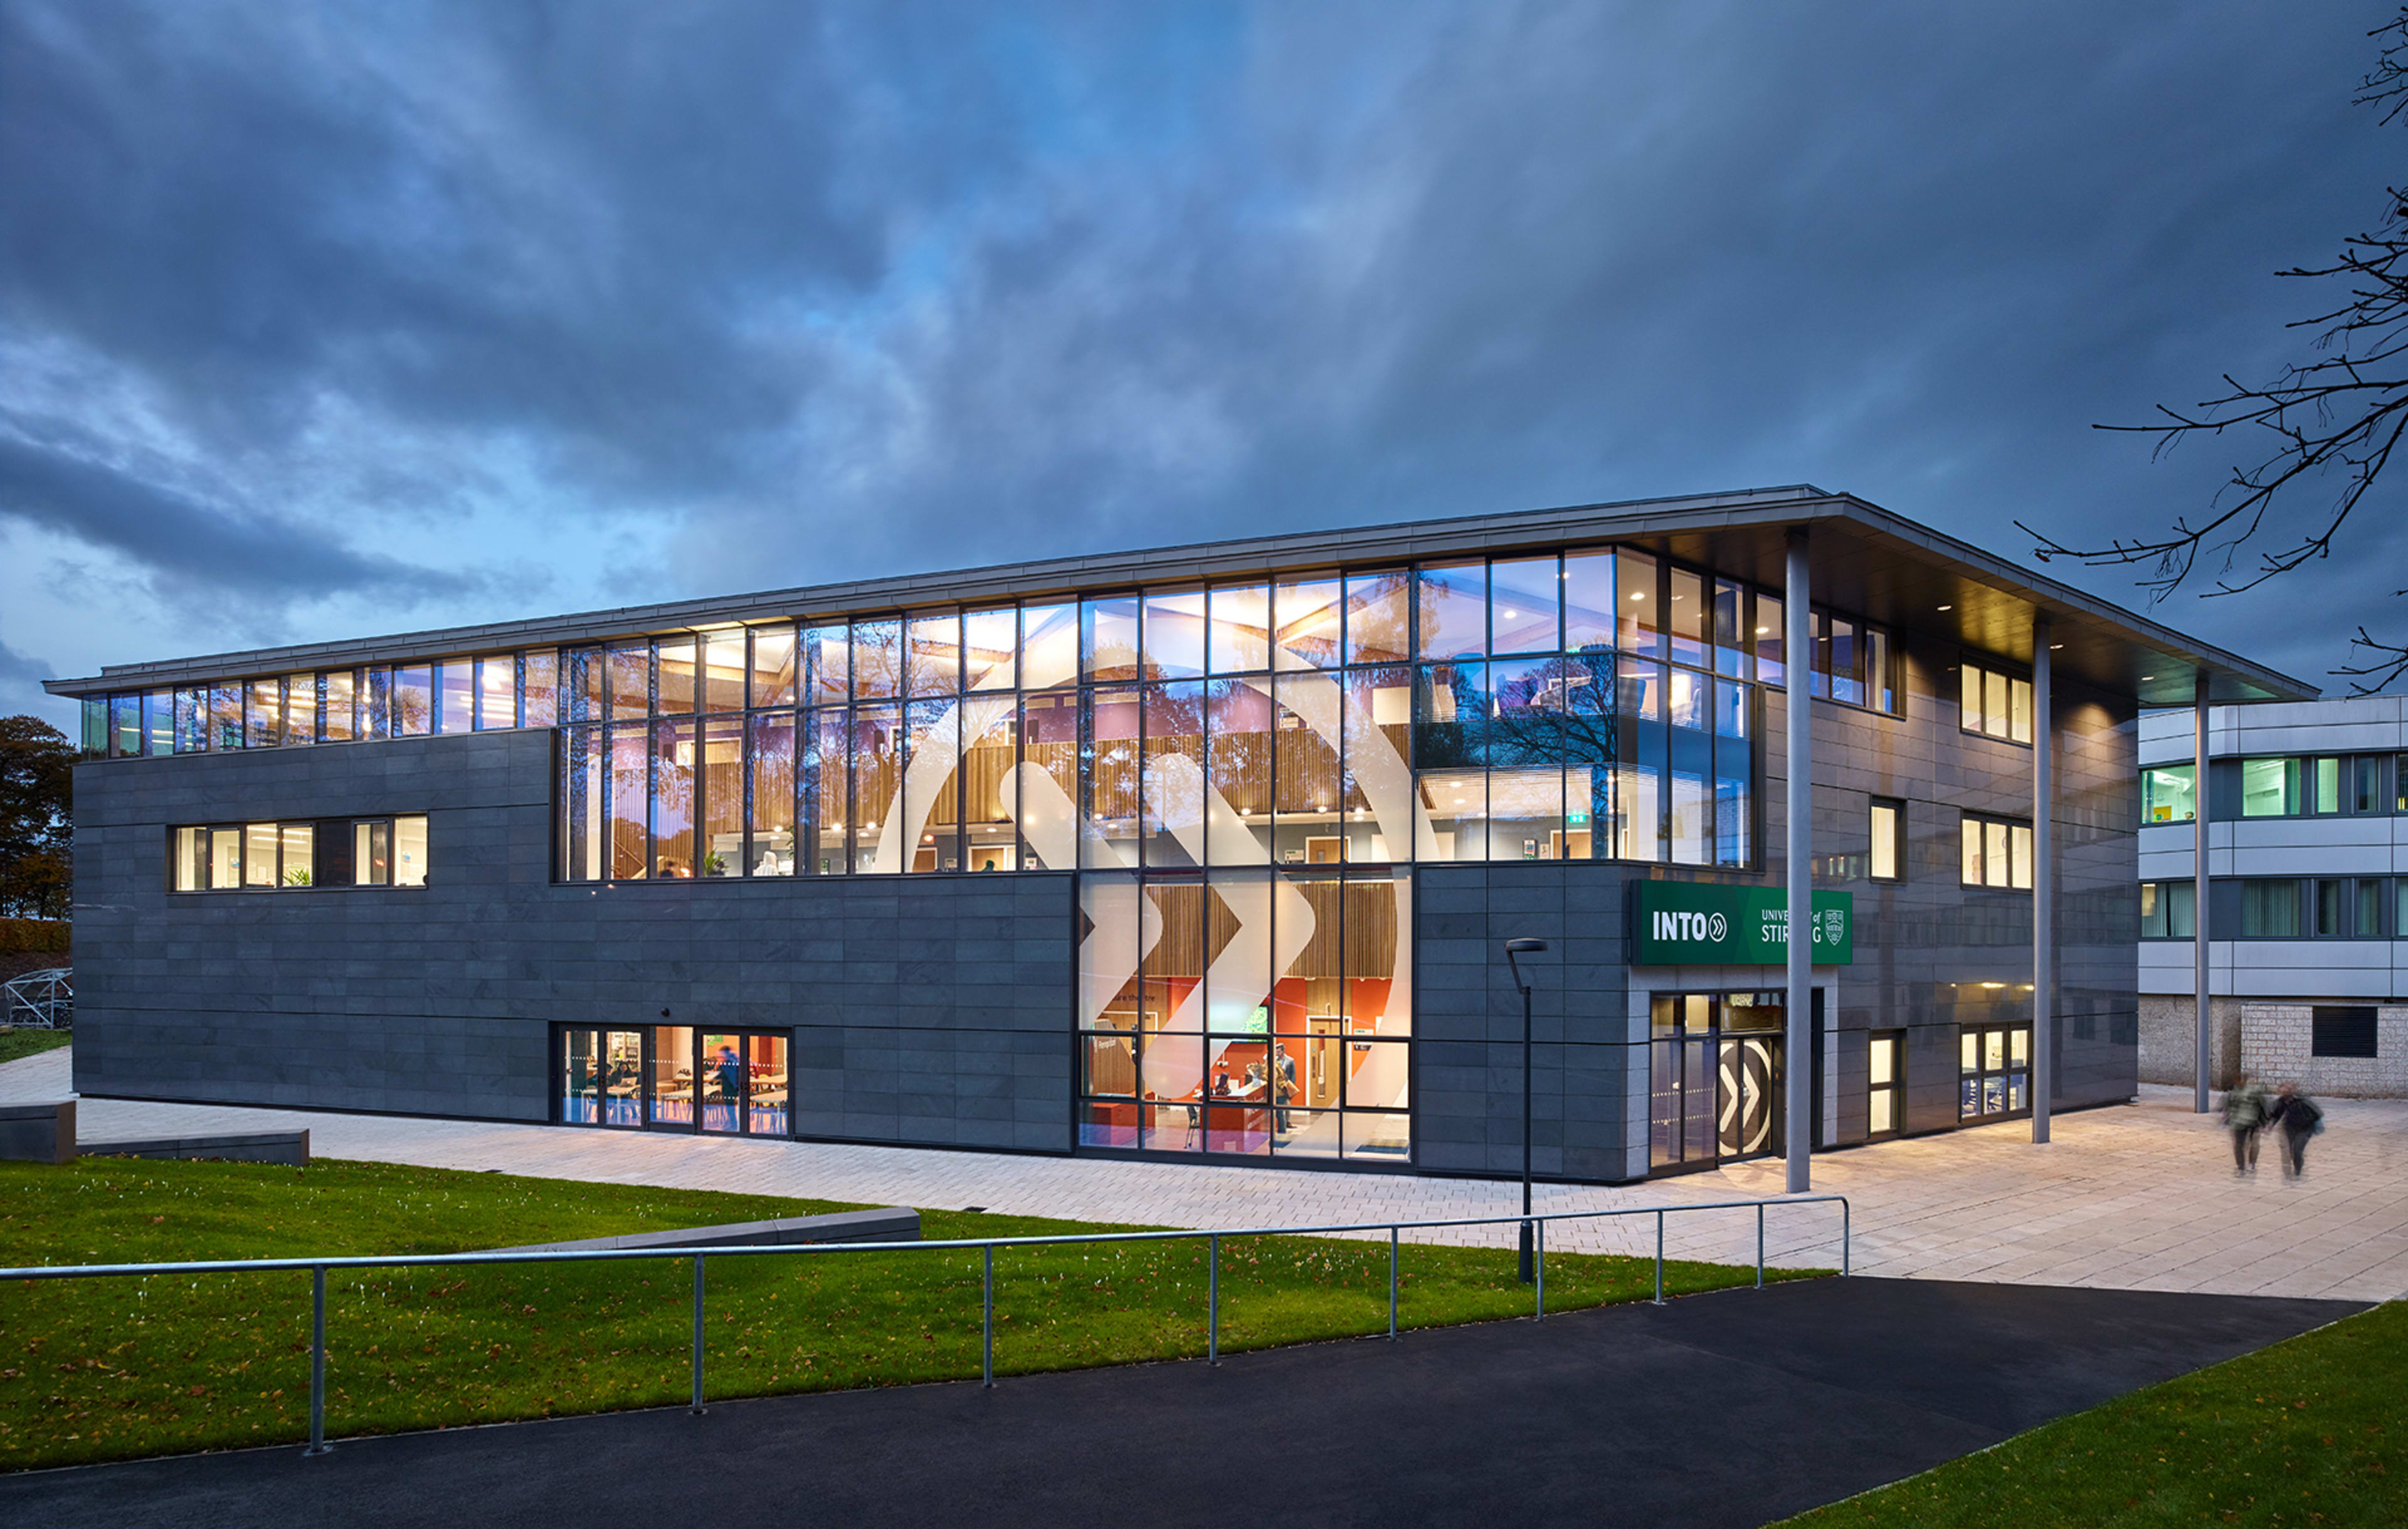 Exterior view in the evening of the INTO Centre at University of Stirling